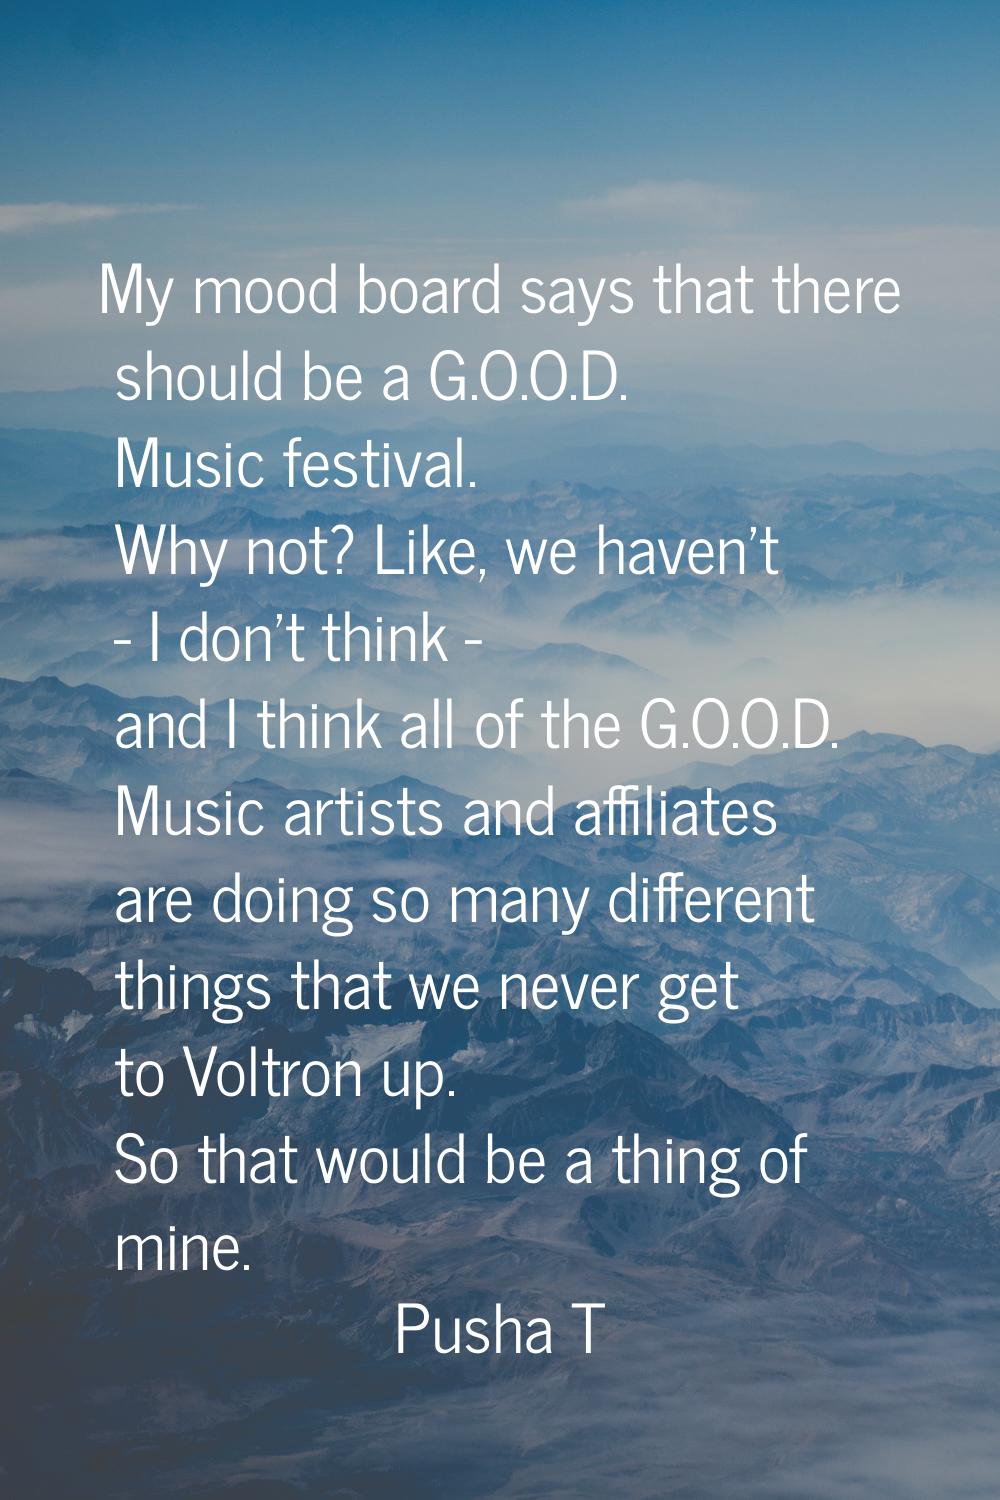 My mood board says that there should be a G.O.O.D. Music festival. Why not? Like, we haven't - I do